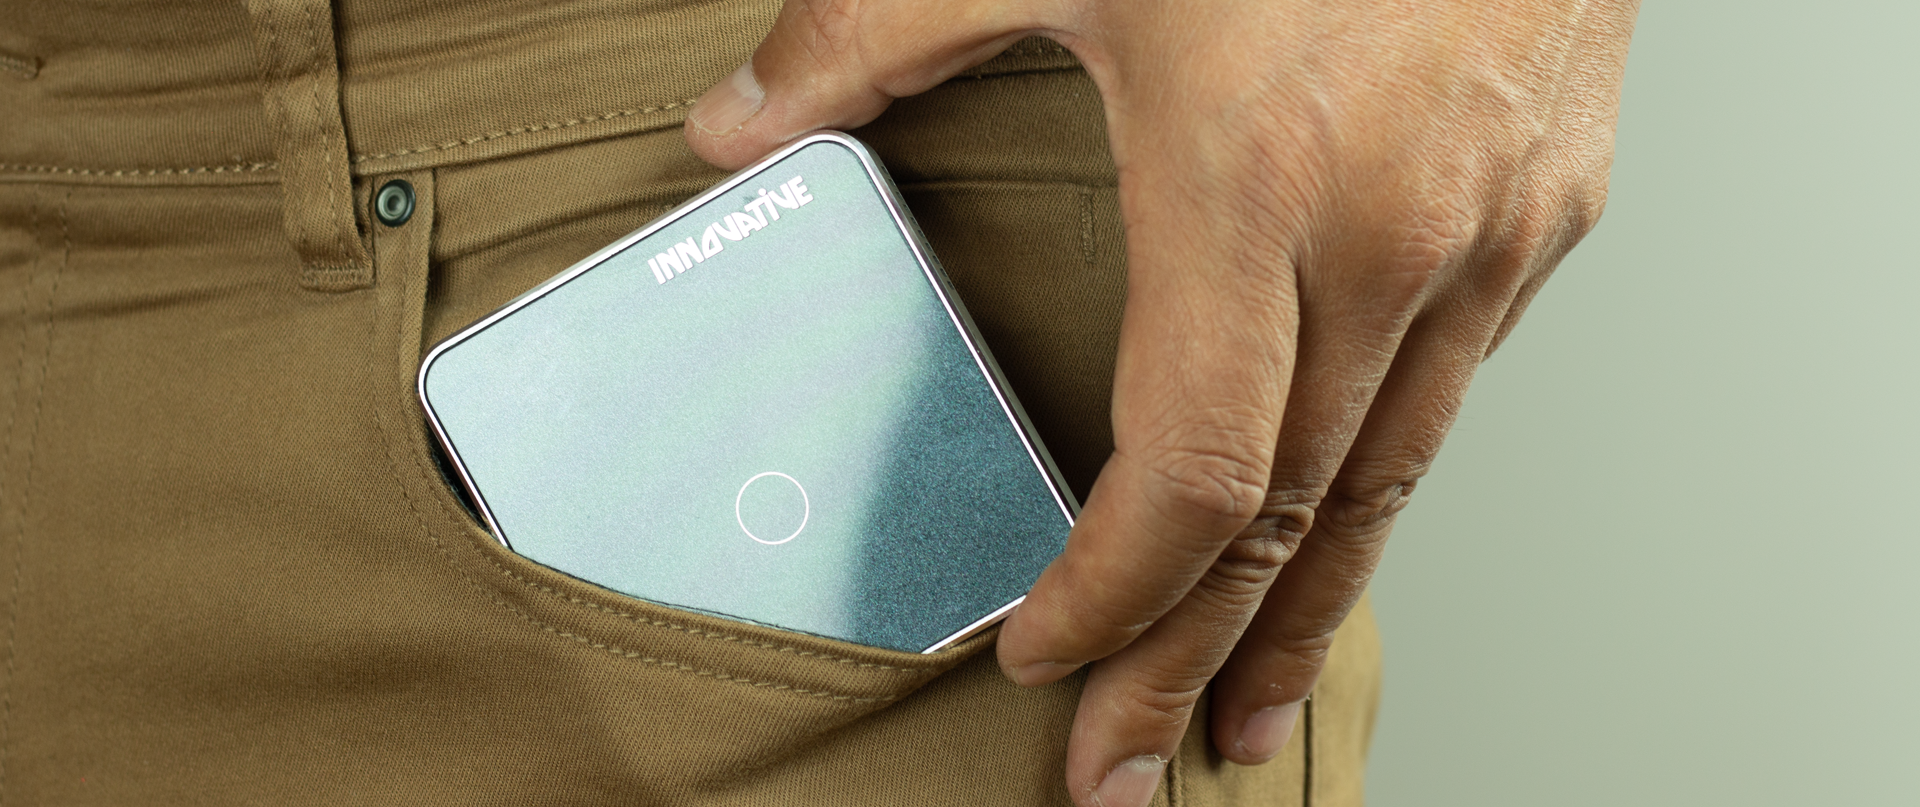 Innovative-lumiere-mini-projector-fits-into-the-pocket